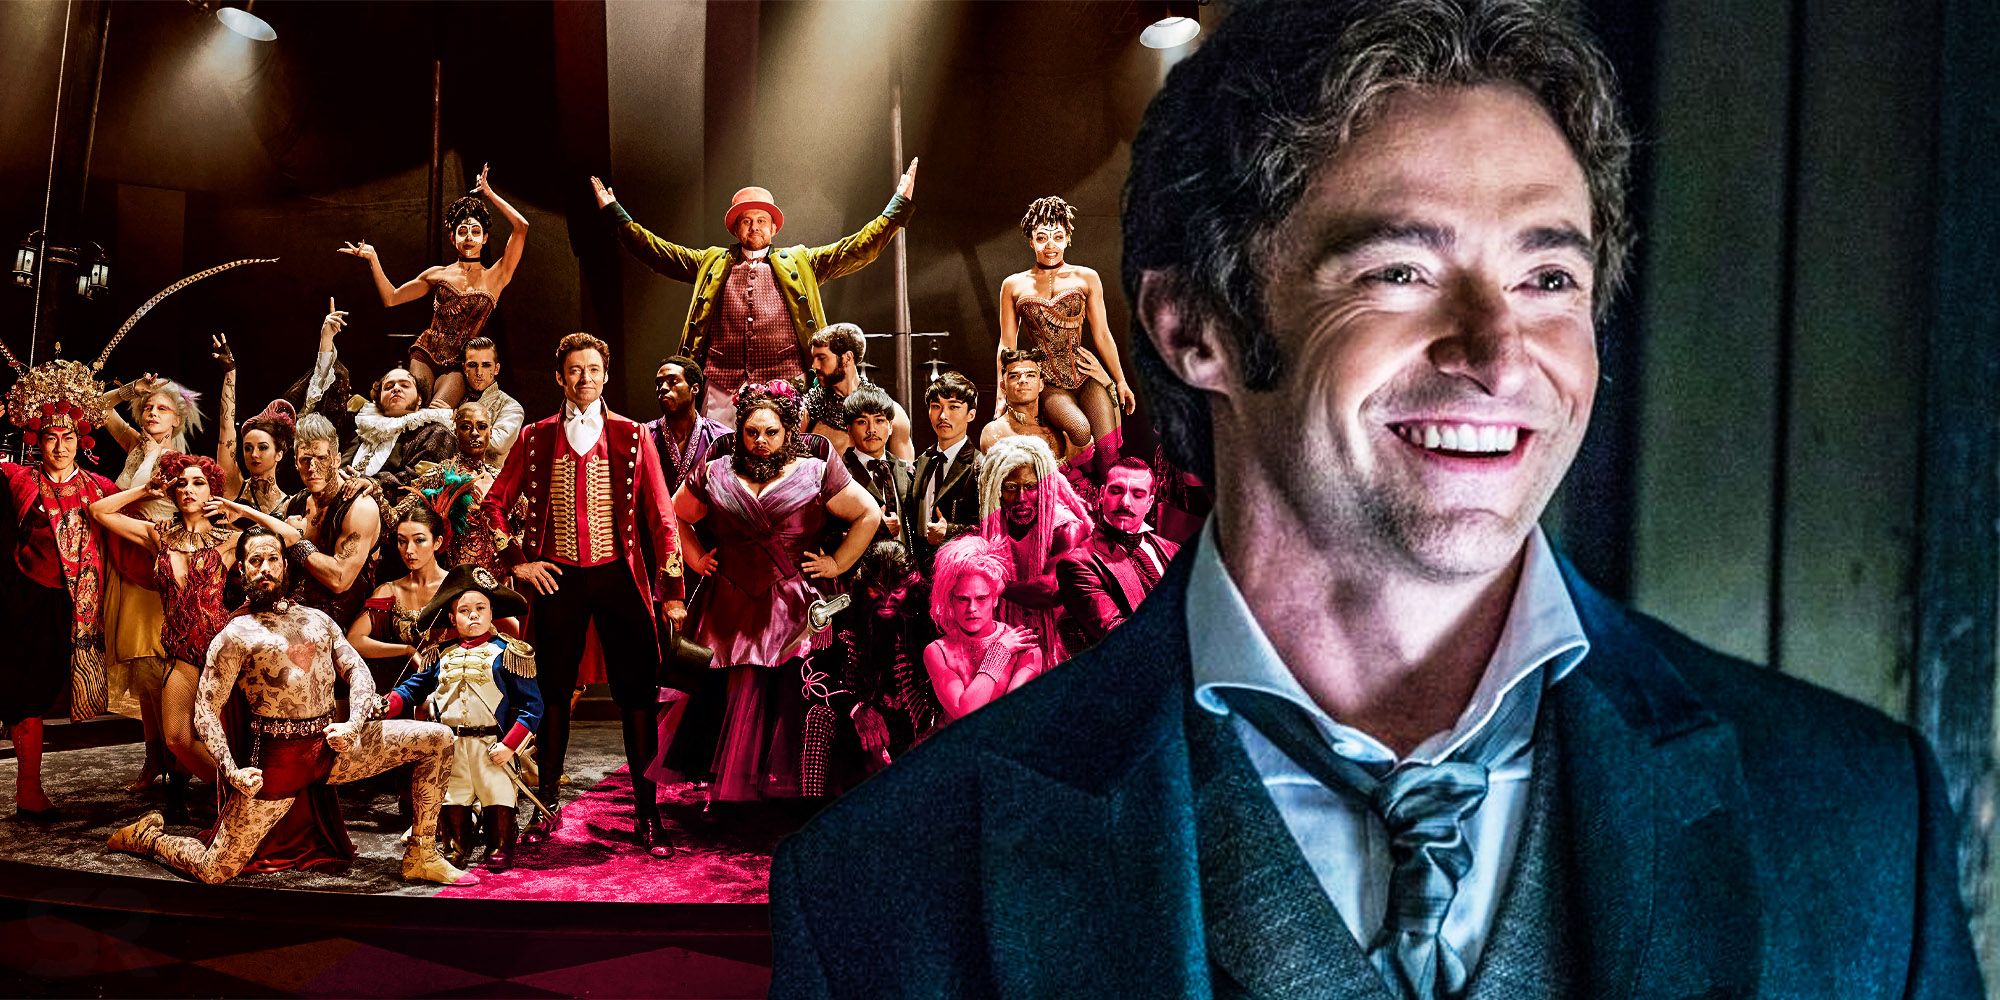 A blended image features Hugh Jackman as PT Barnum in front of the members of his circus in The Greatest Showman